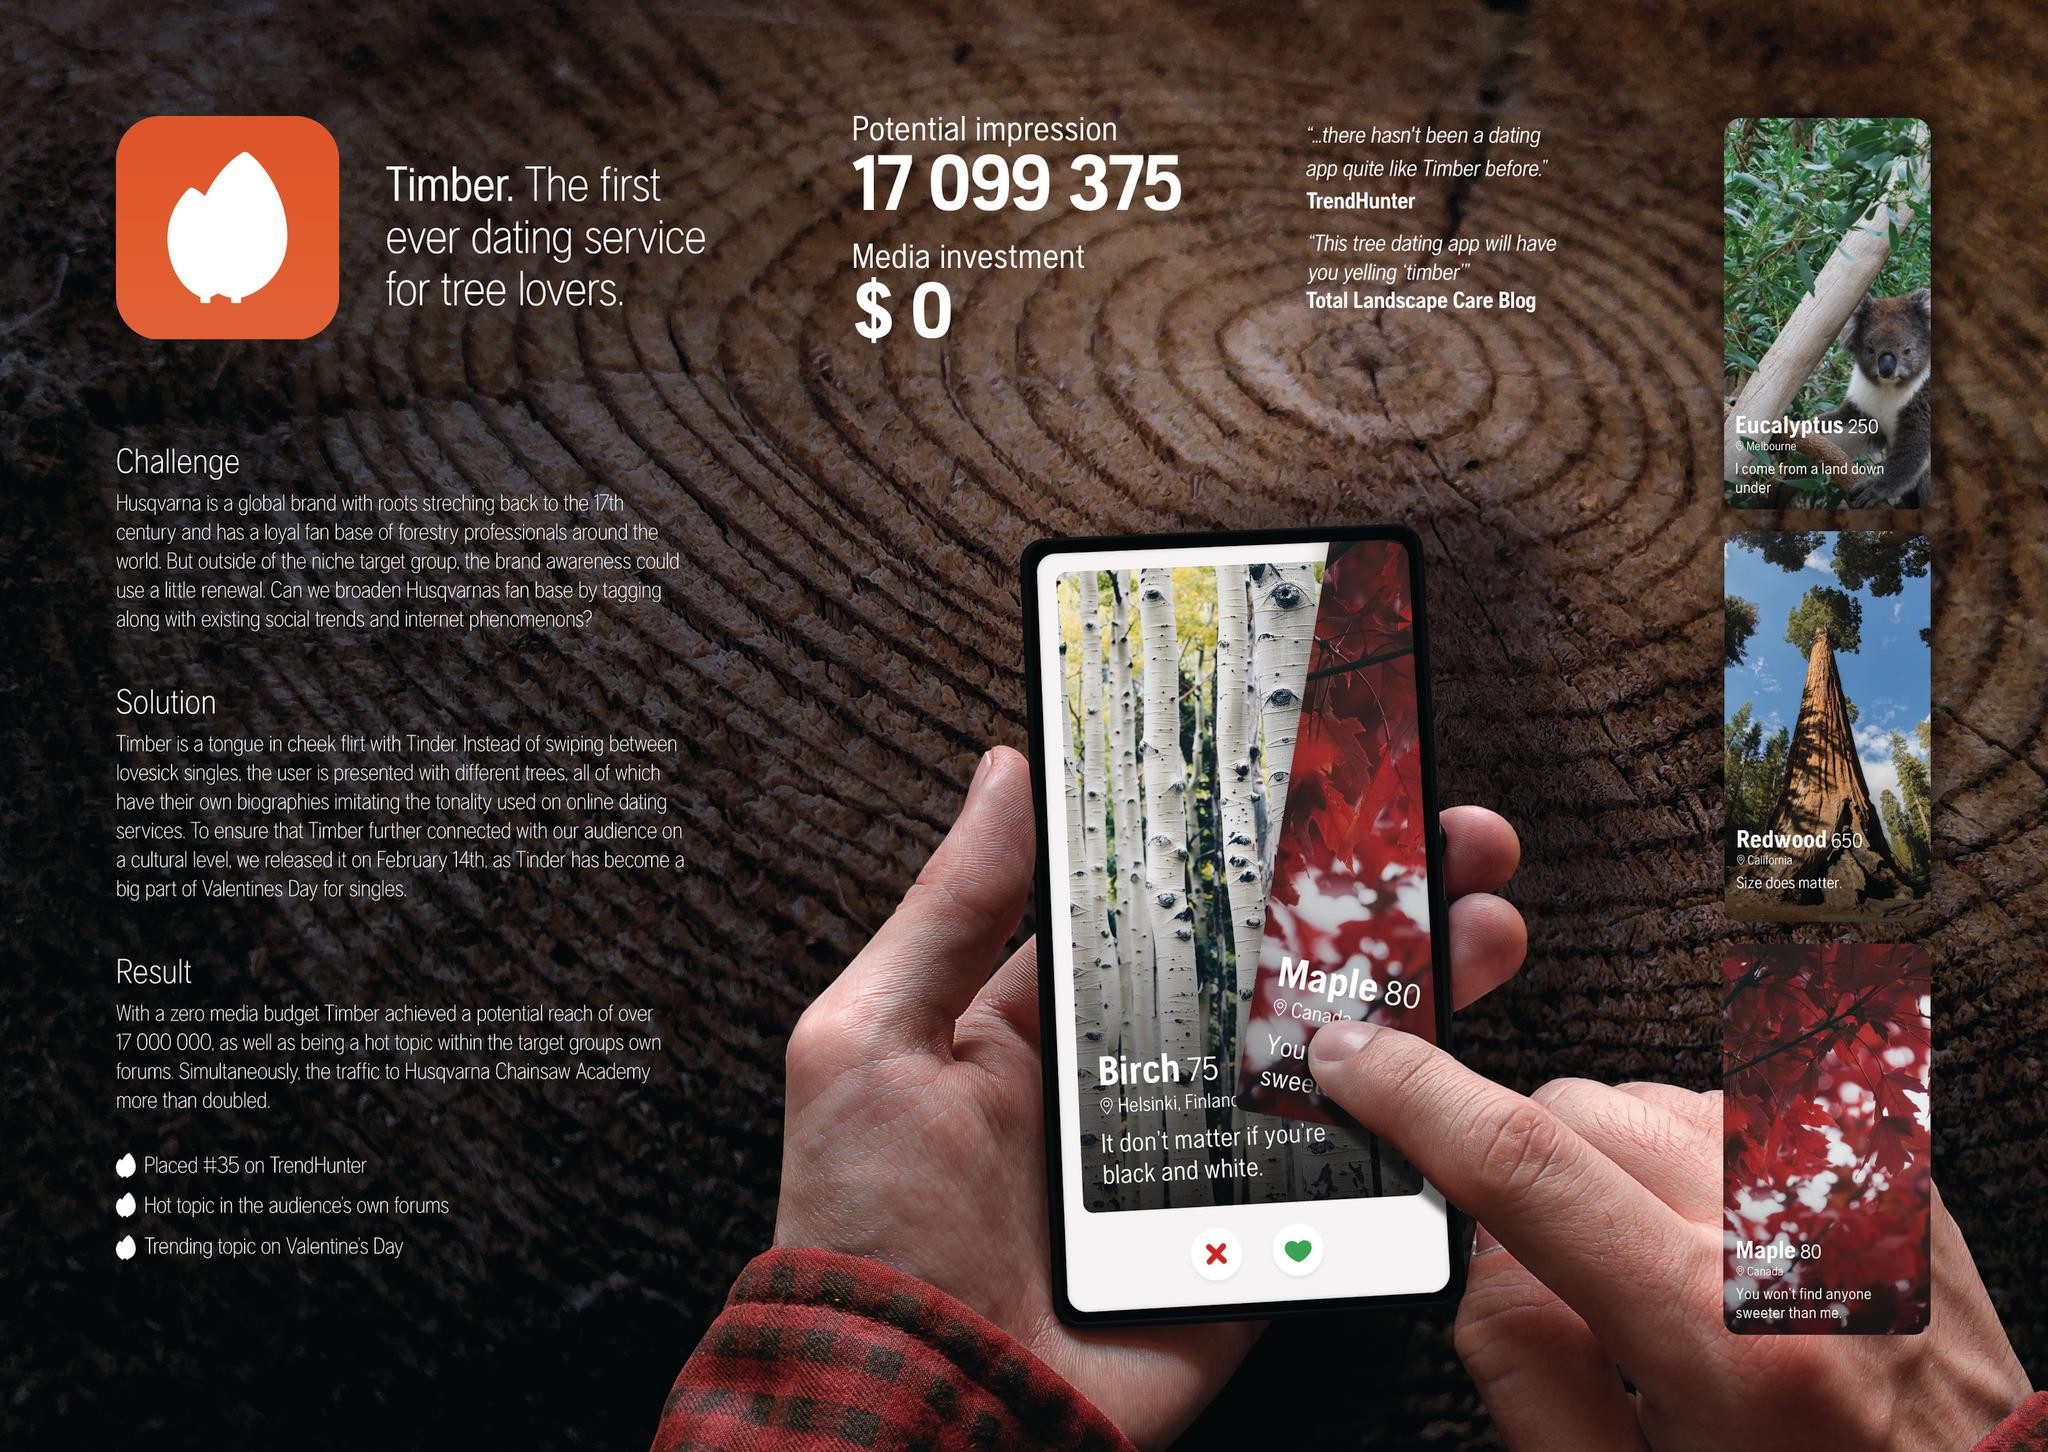 TIMBER - THE FIRST EVER DATING SERVICE FOR TREE LOVERS